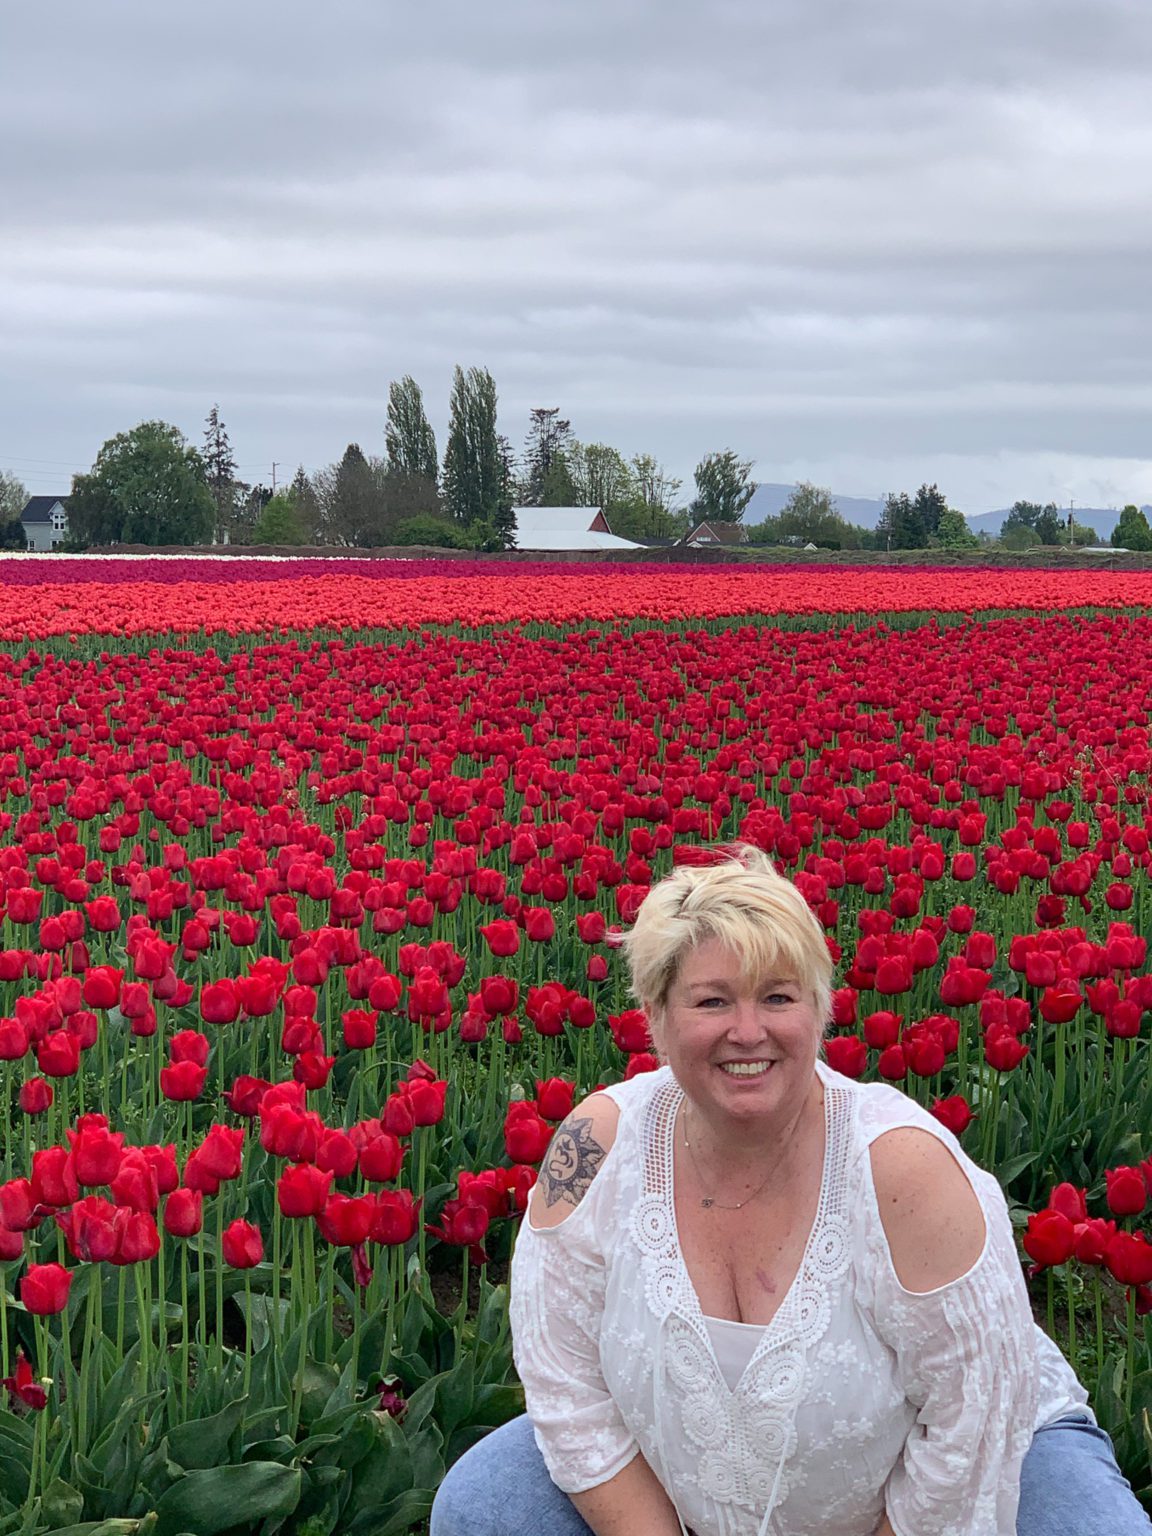 Tulips, Whales & Bridges - An Epic Day in the PNW